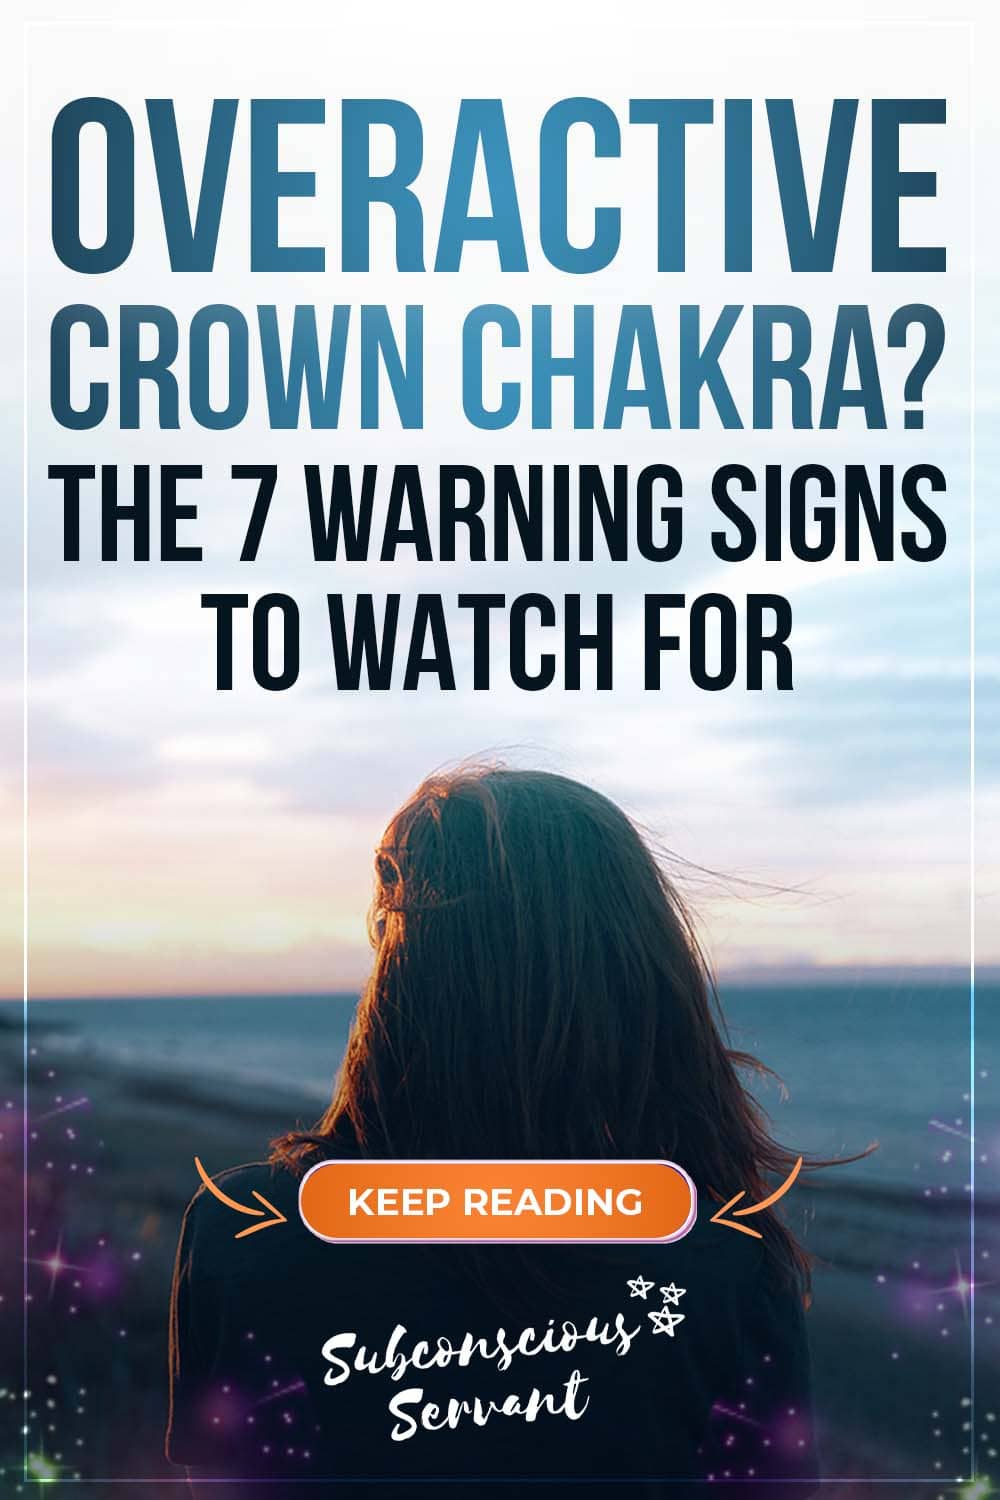 Have An Overactive Crown Chakra? (7 Warning Signs)